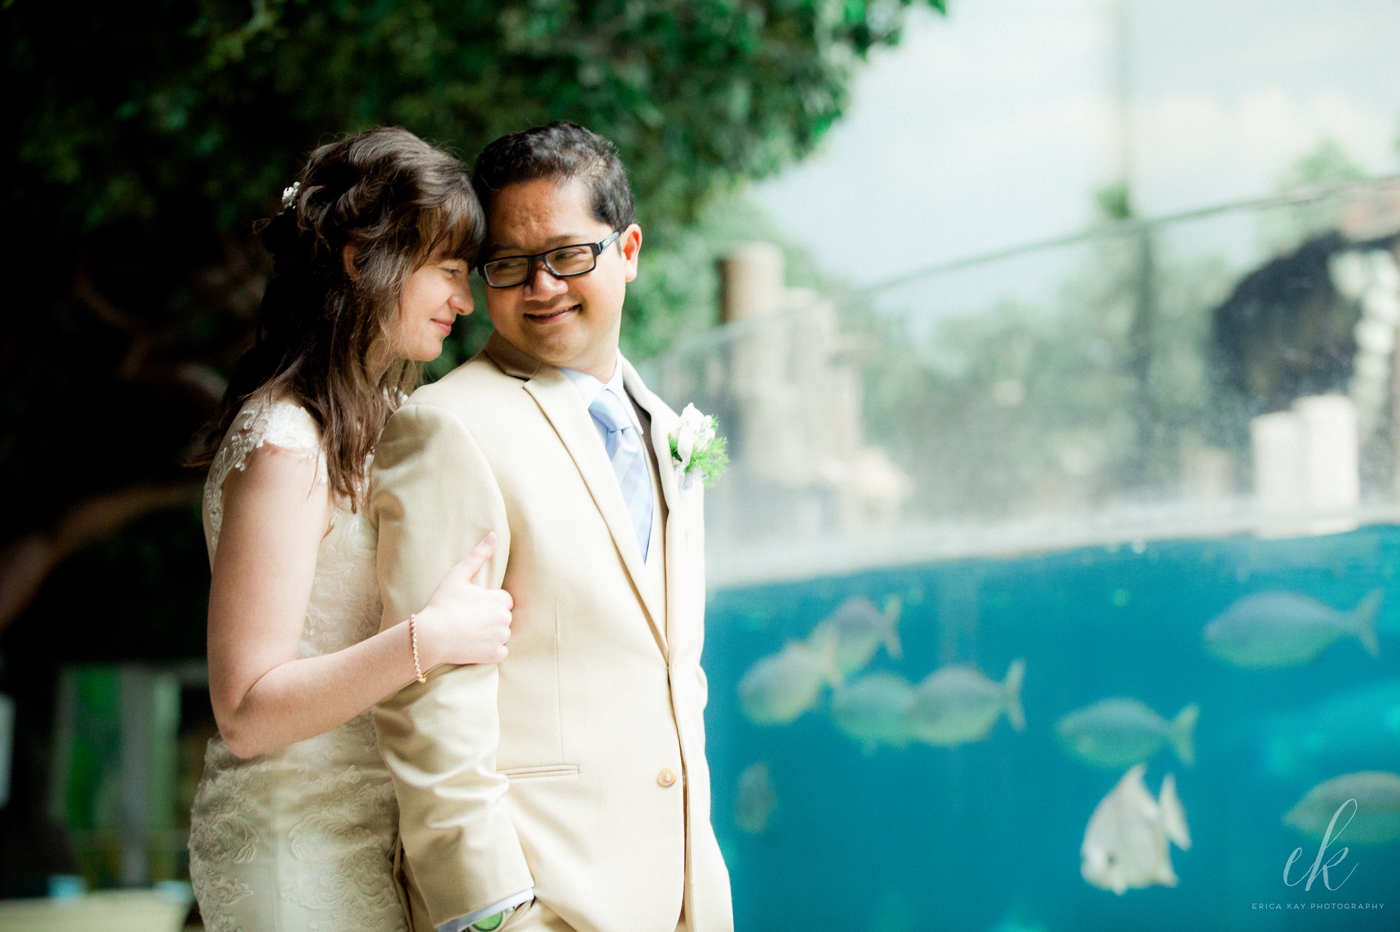 Columbus Zoo Wedding - A photo of the bride and groom with a school of fish.